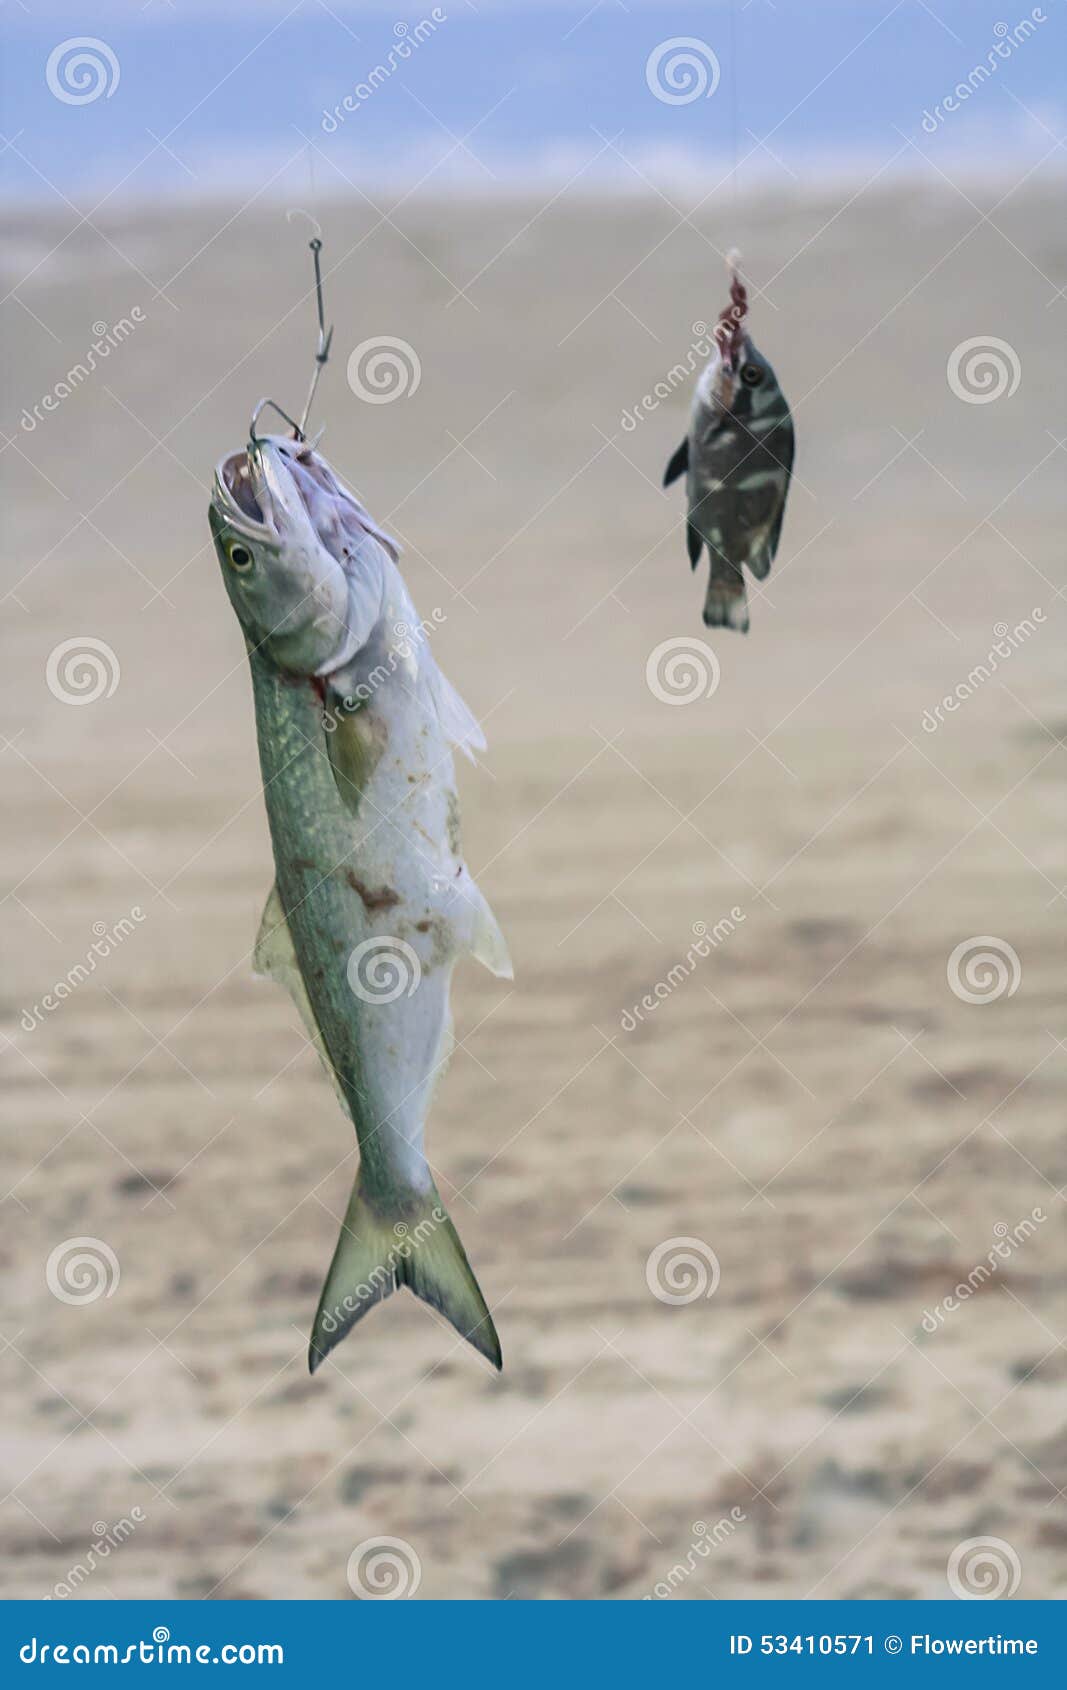 Dead fish on fishing line stock image. Image of hook - 53410571